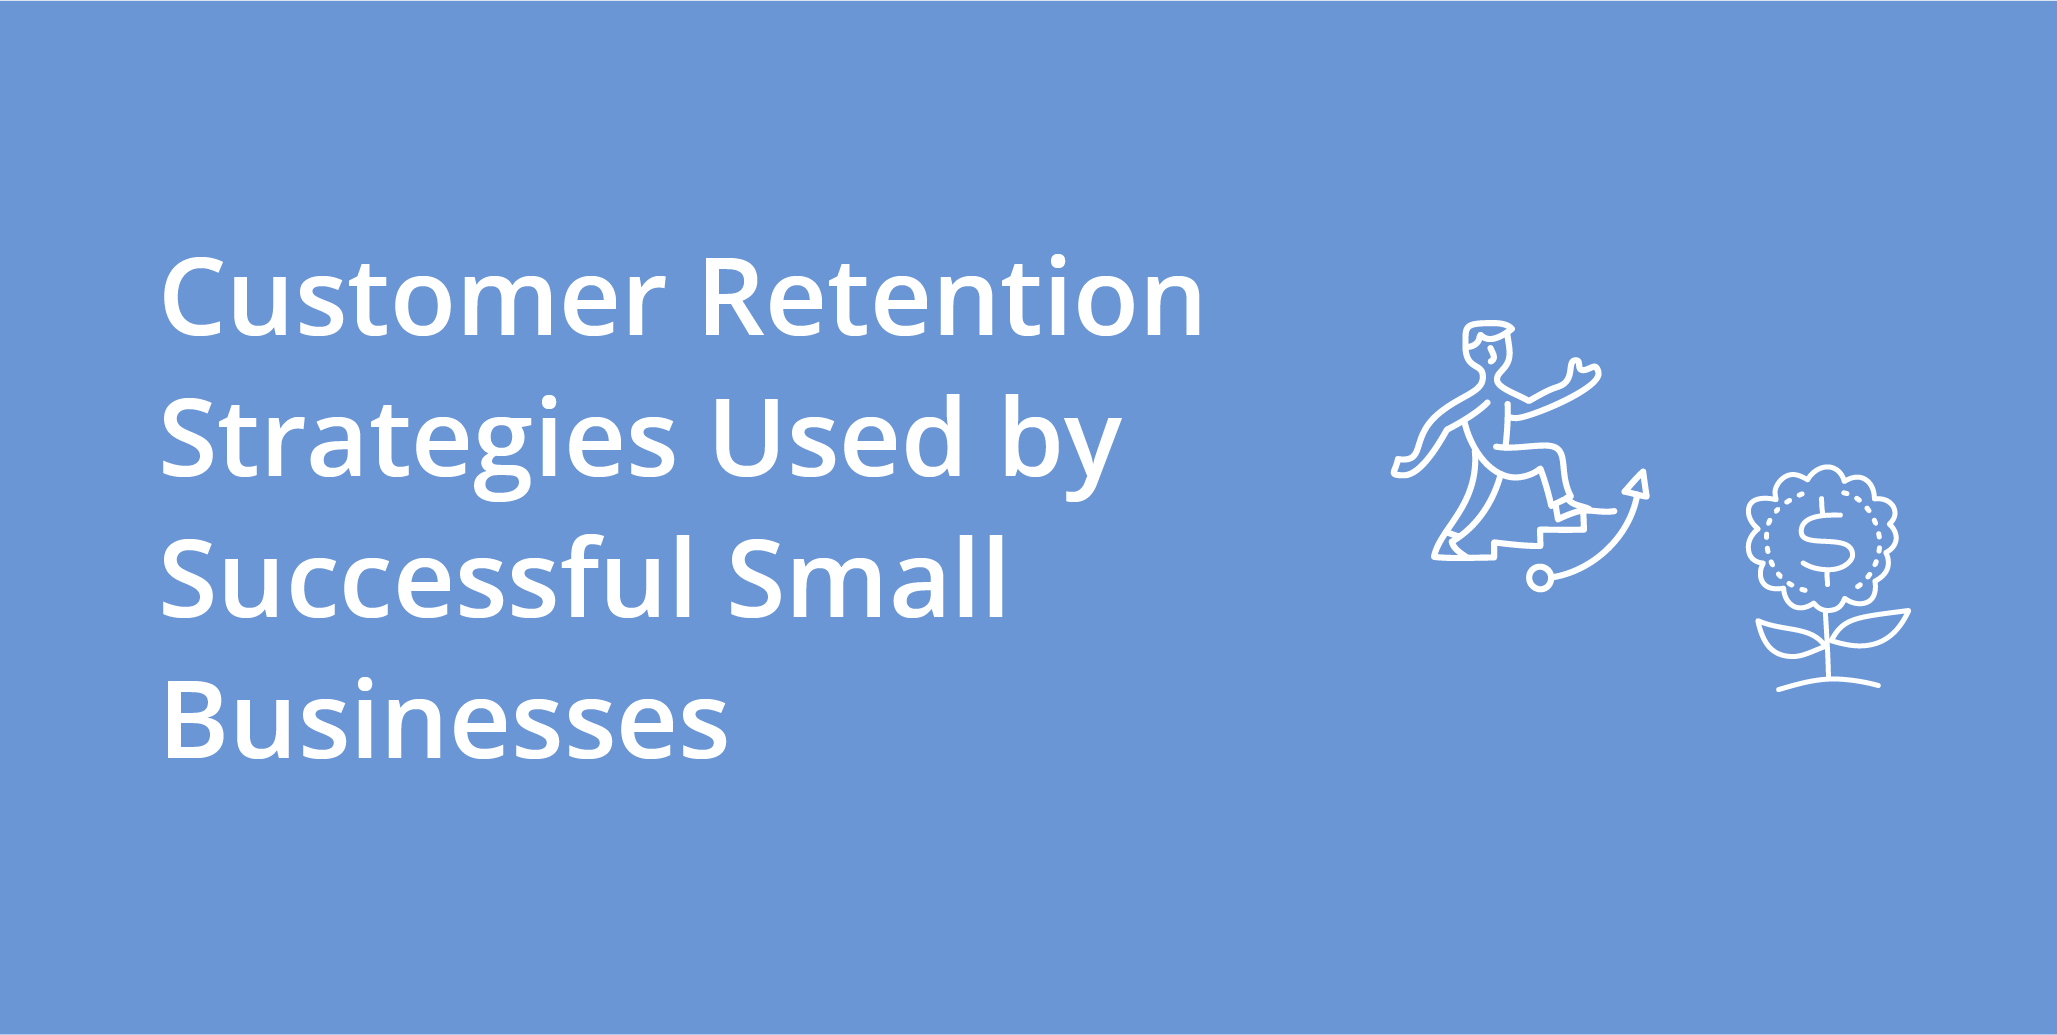 Customer Retention Strategies Used by Successful Small Businesses 